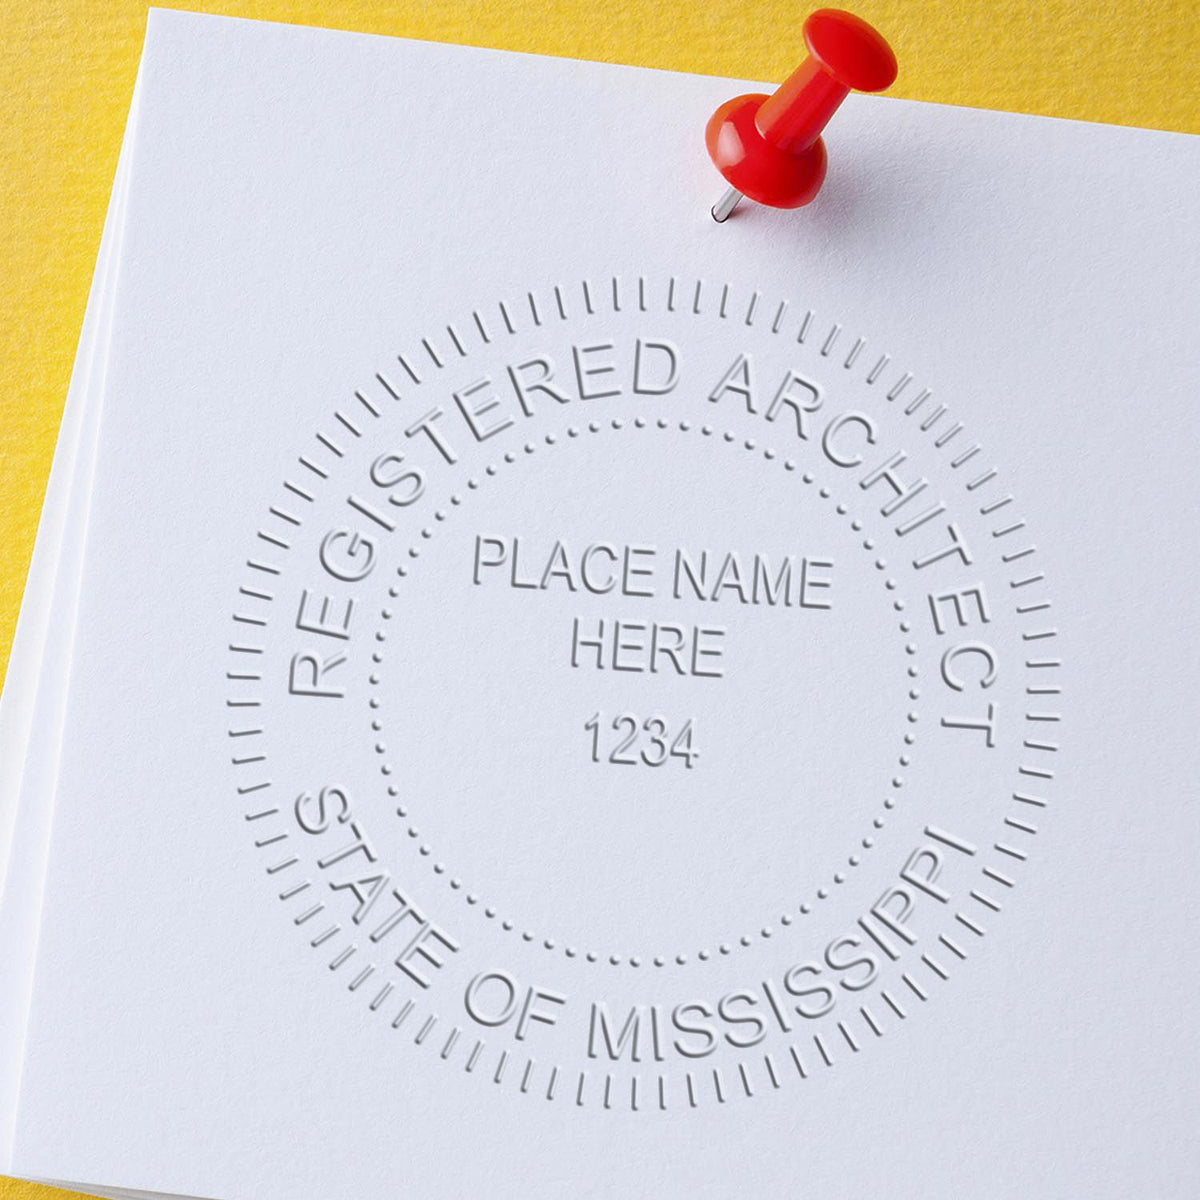 The Gift Mississippi Architect Seal stamp impression comes to life with a crisp, detailed image stamped on paper - showcasing true professional quality.